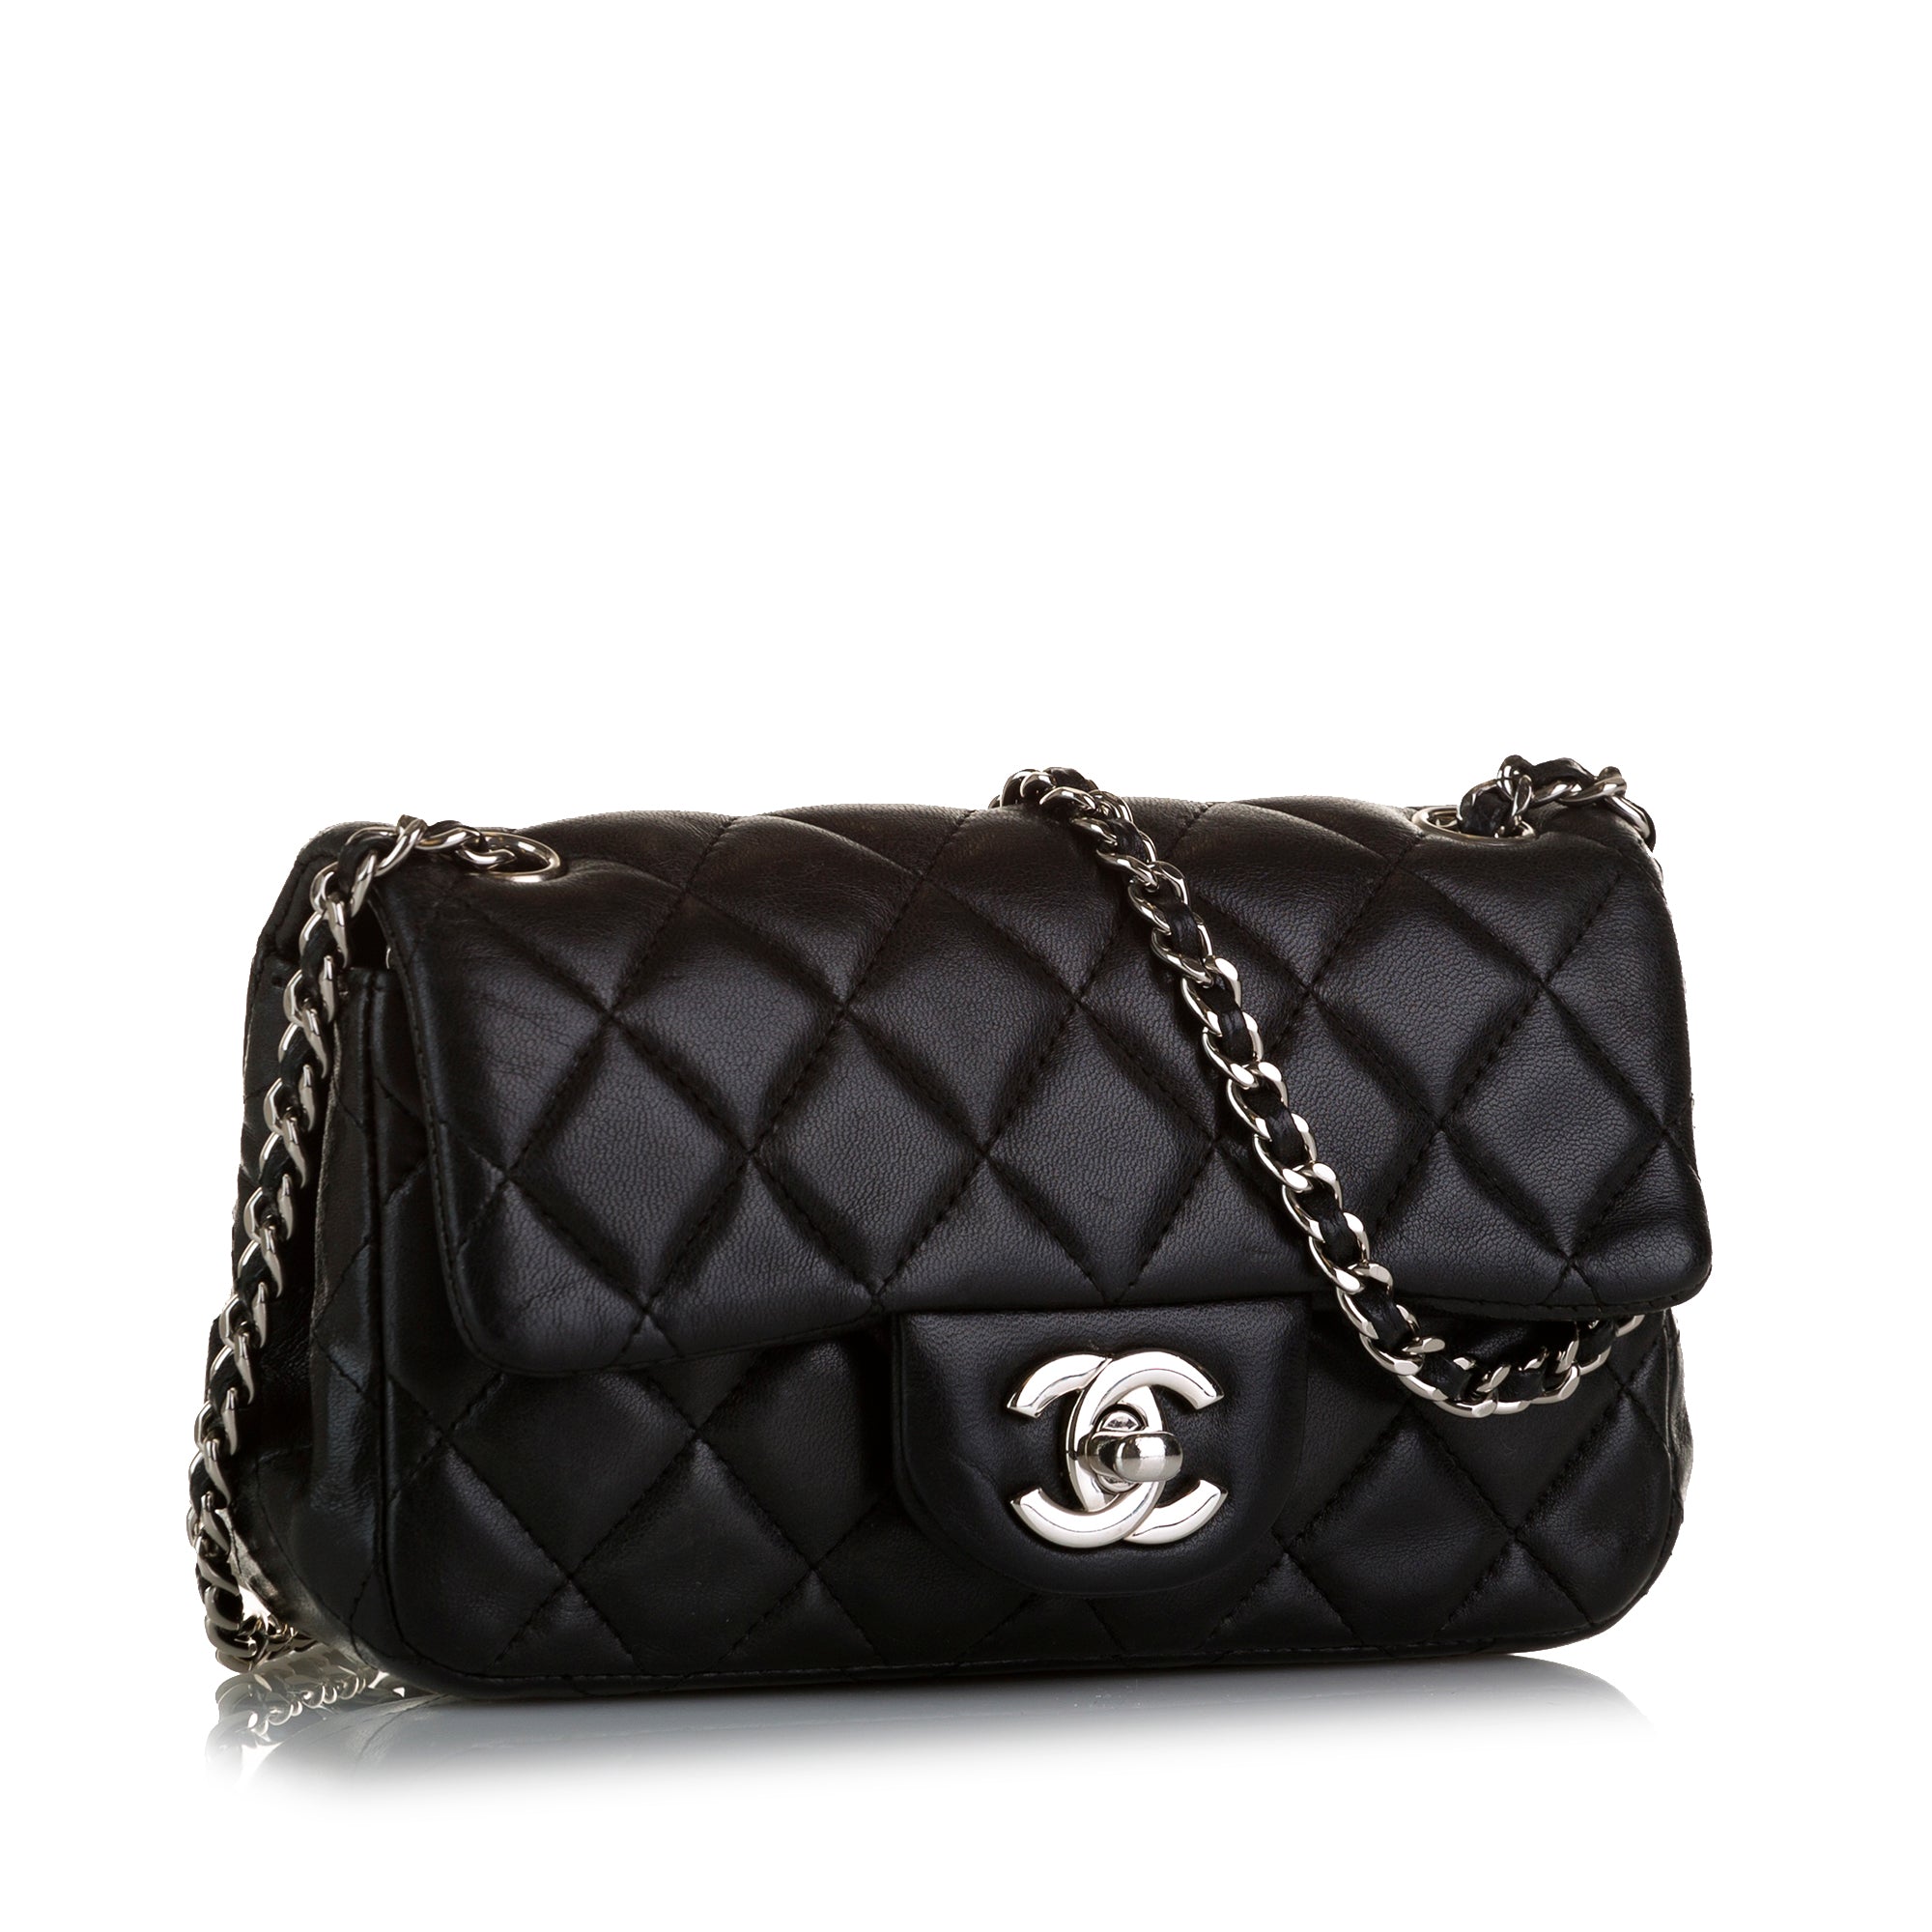 Chanel Black Caviar Vintage Quilted Classic Crossbody Flap Bag